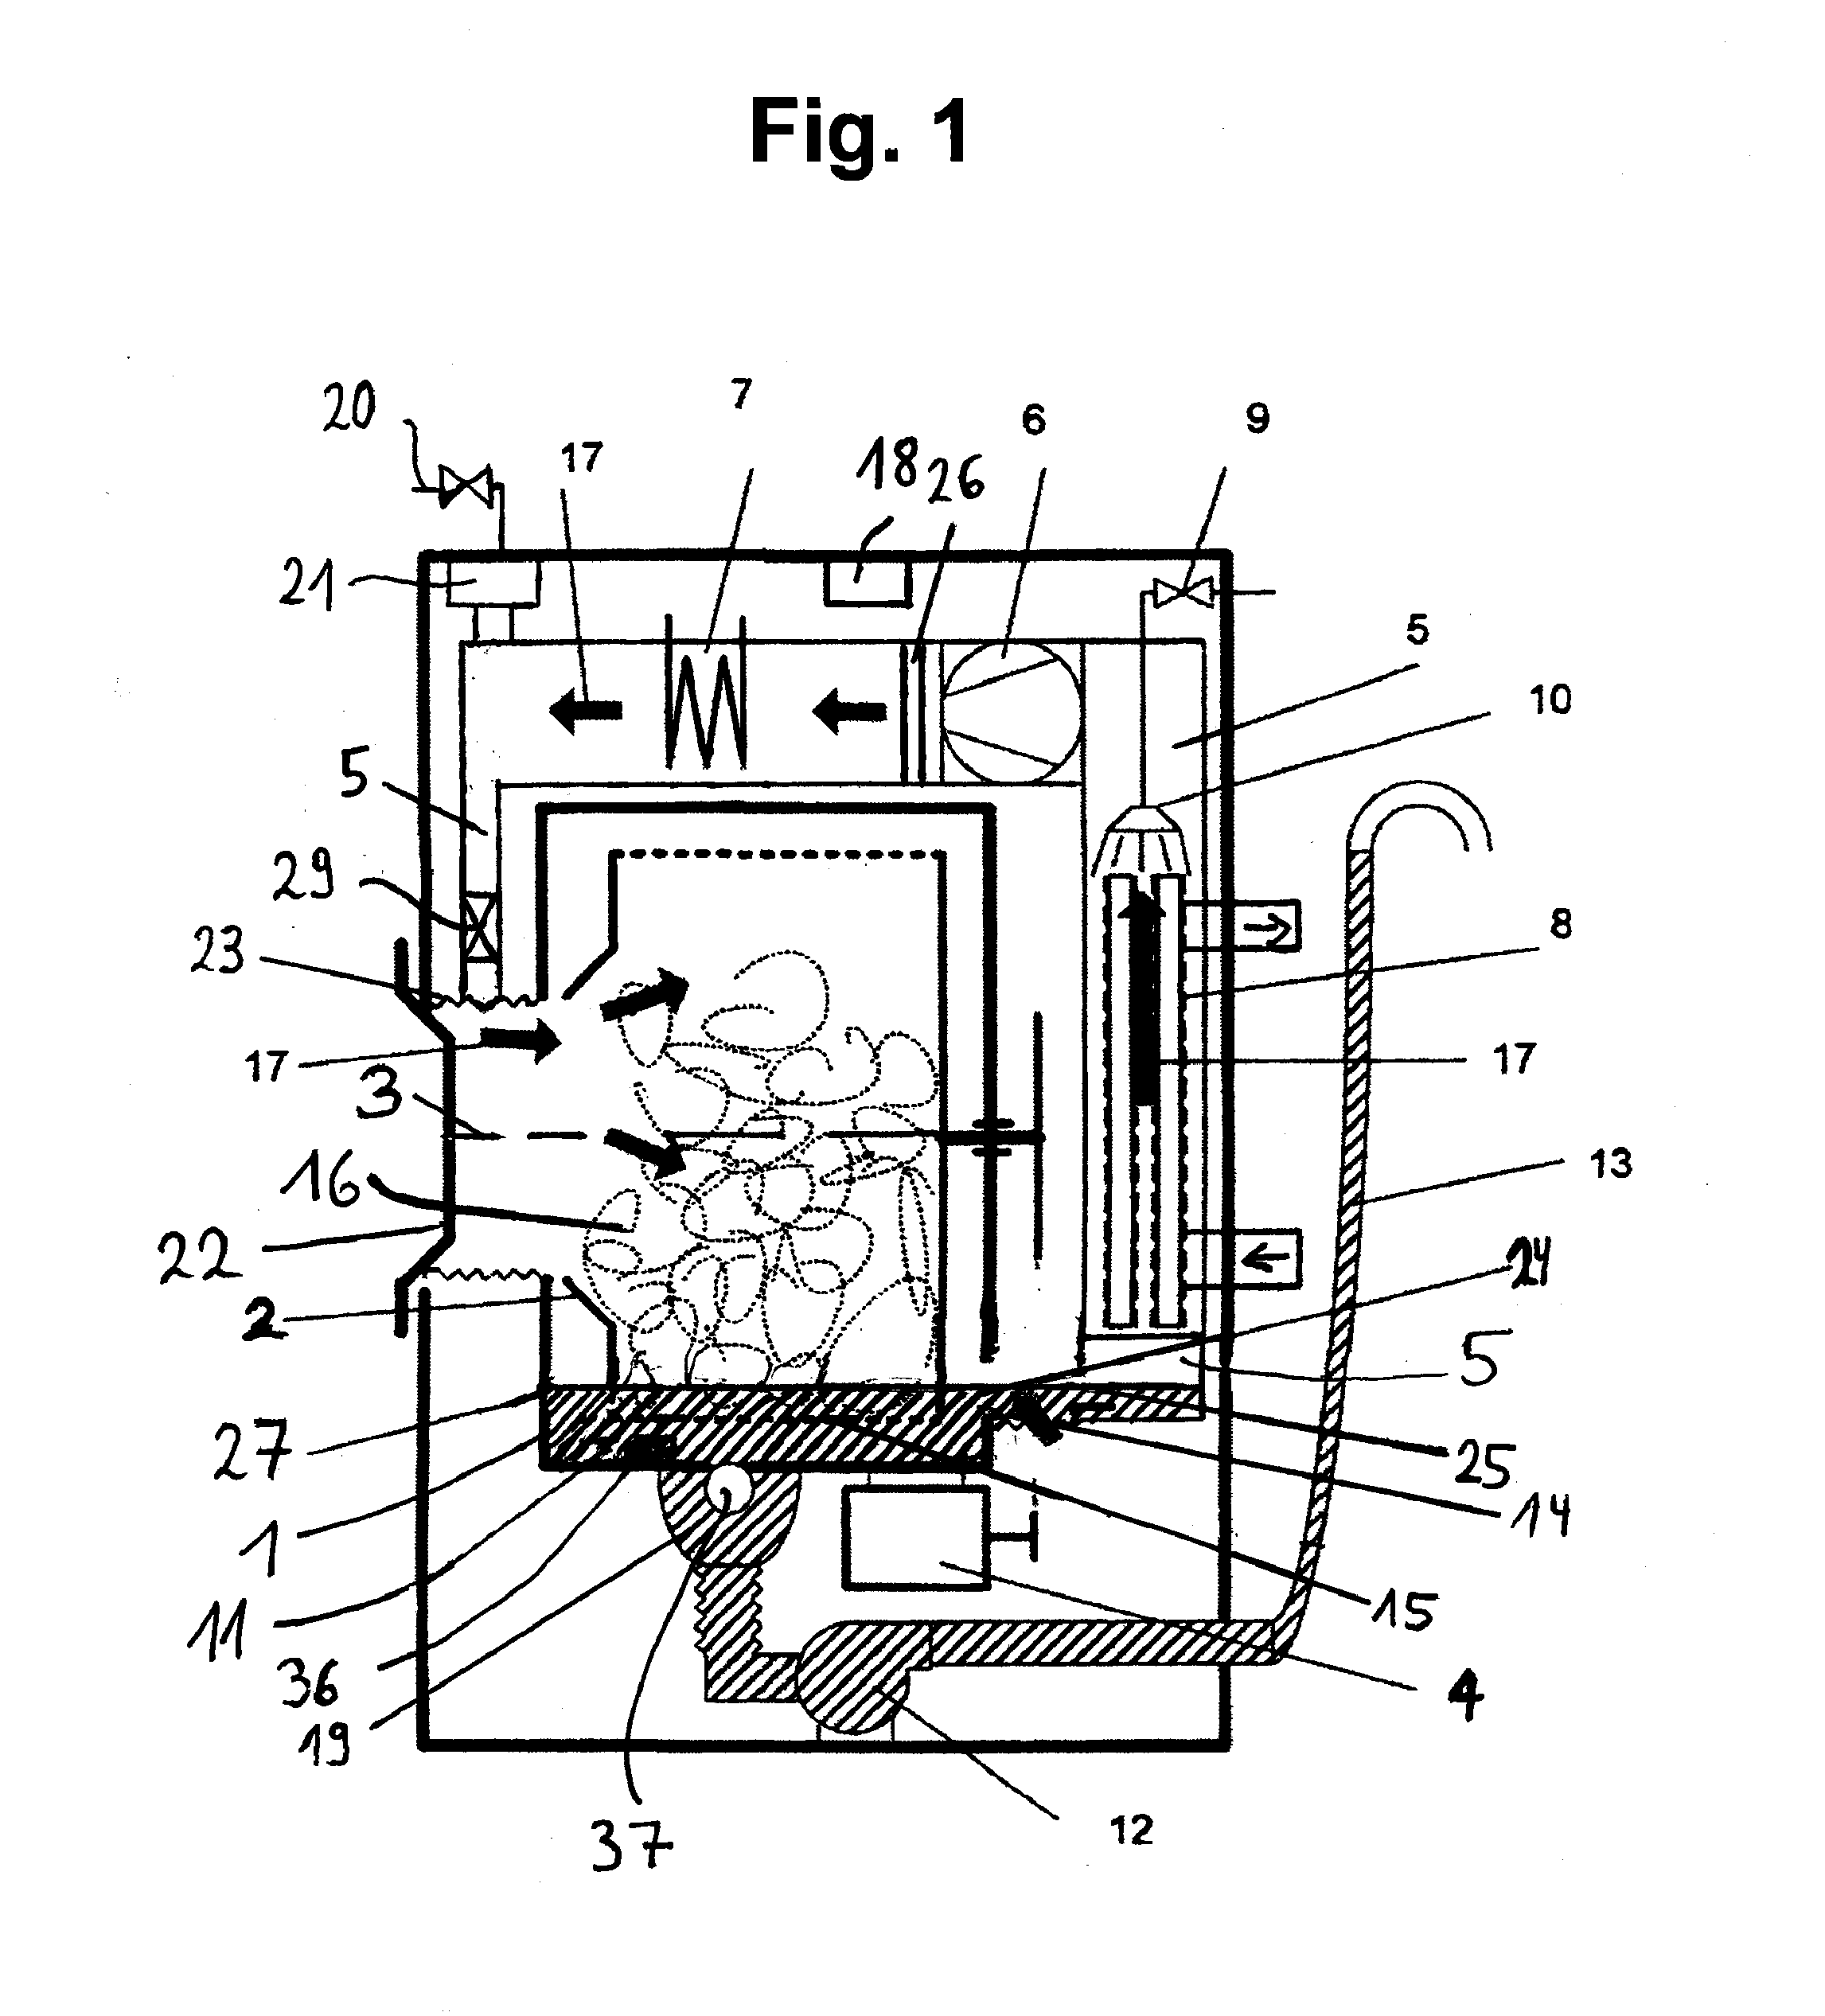 Dryer with a temperature sensor and process for its operation